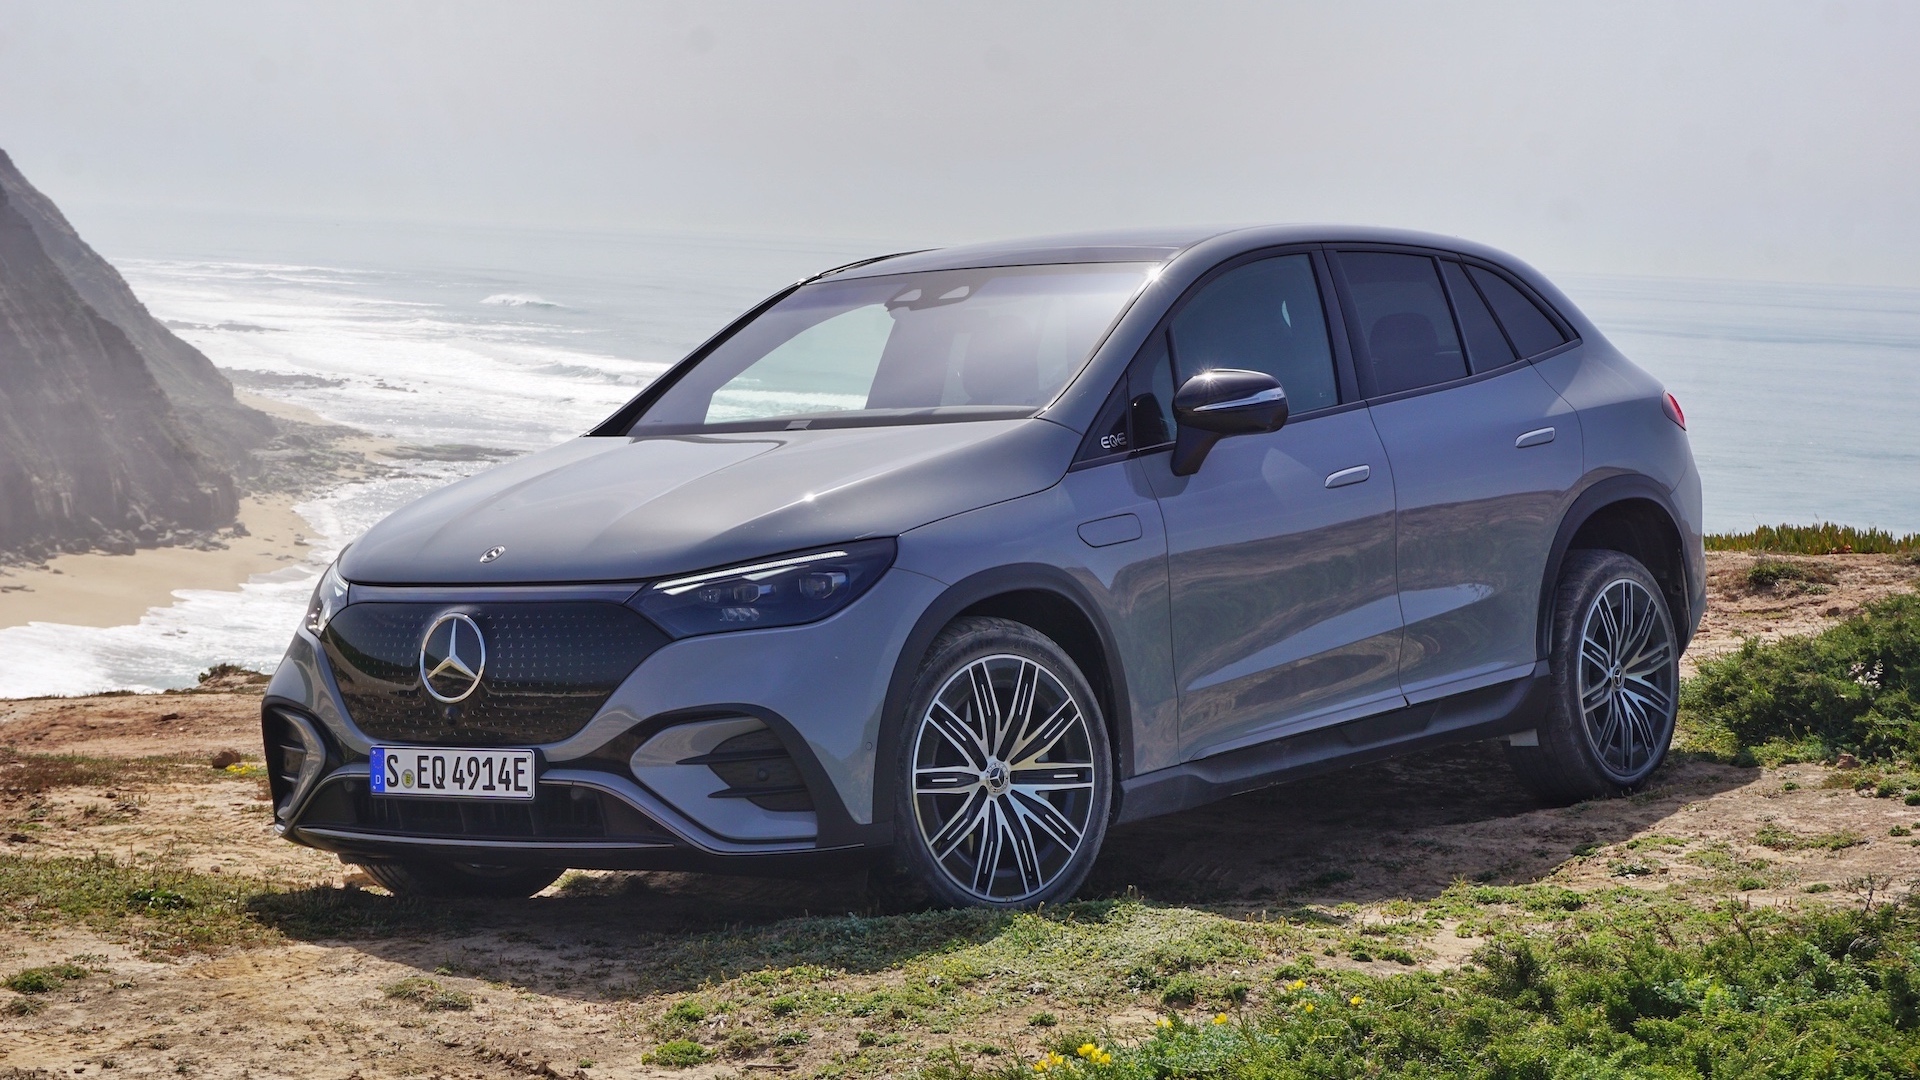 The 2023 Mercedes-Benz EQS SUV adds practicality to big-time